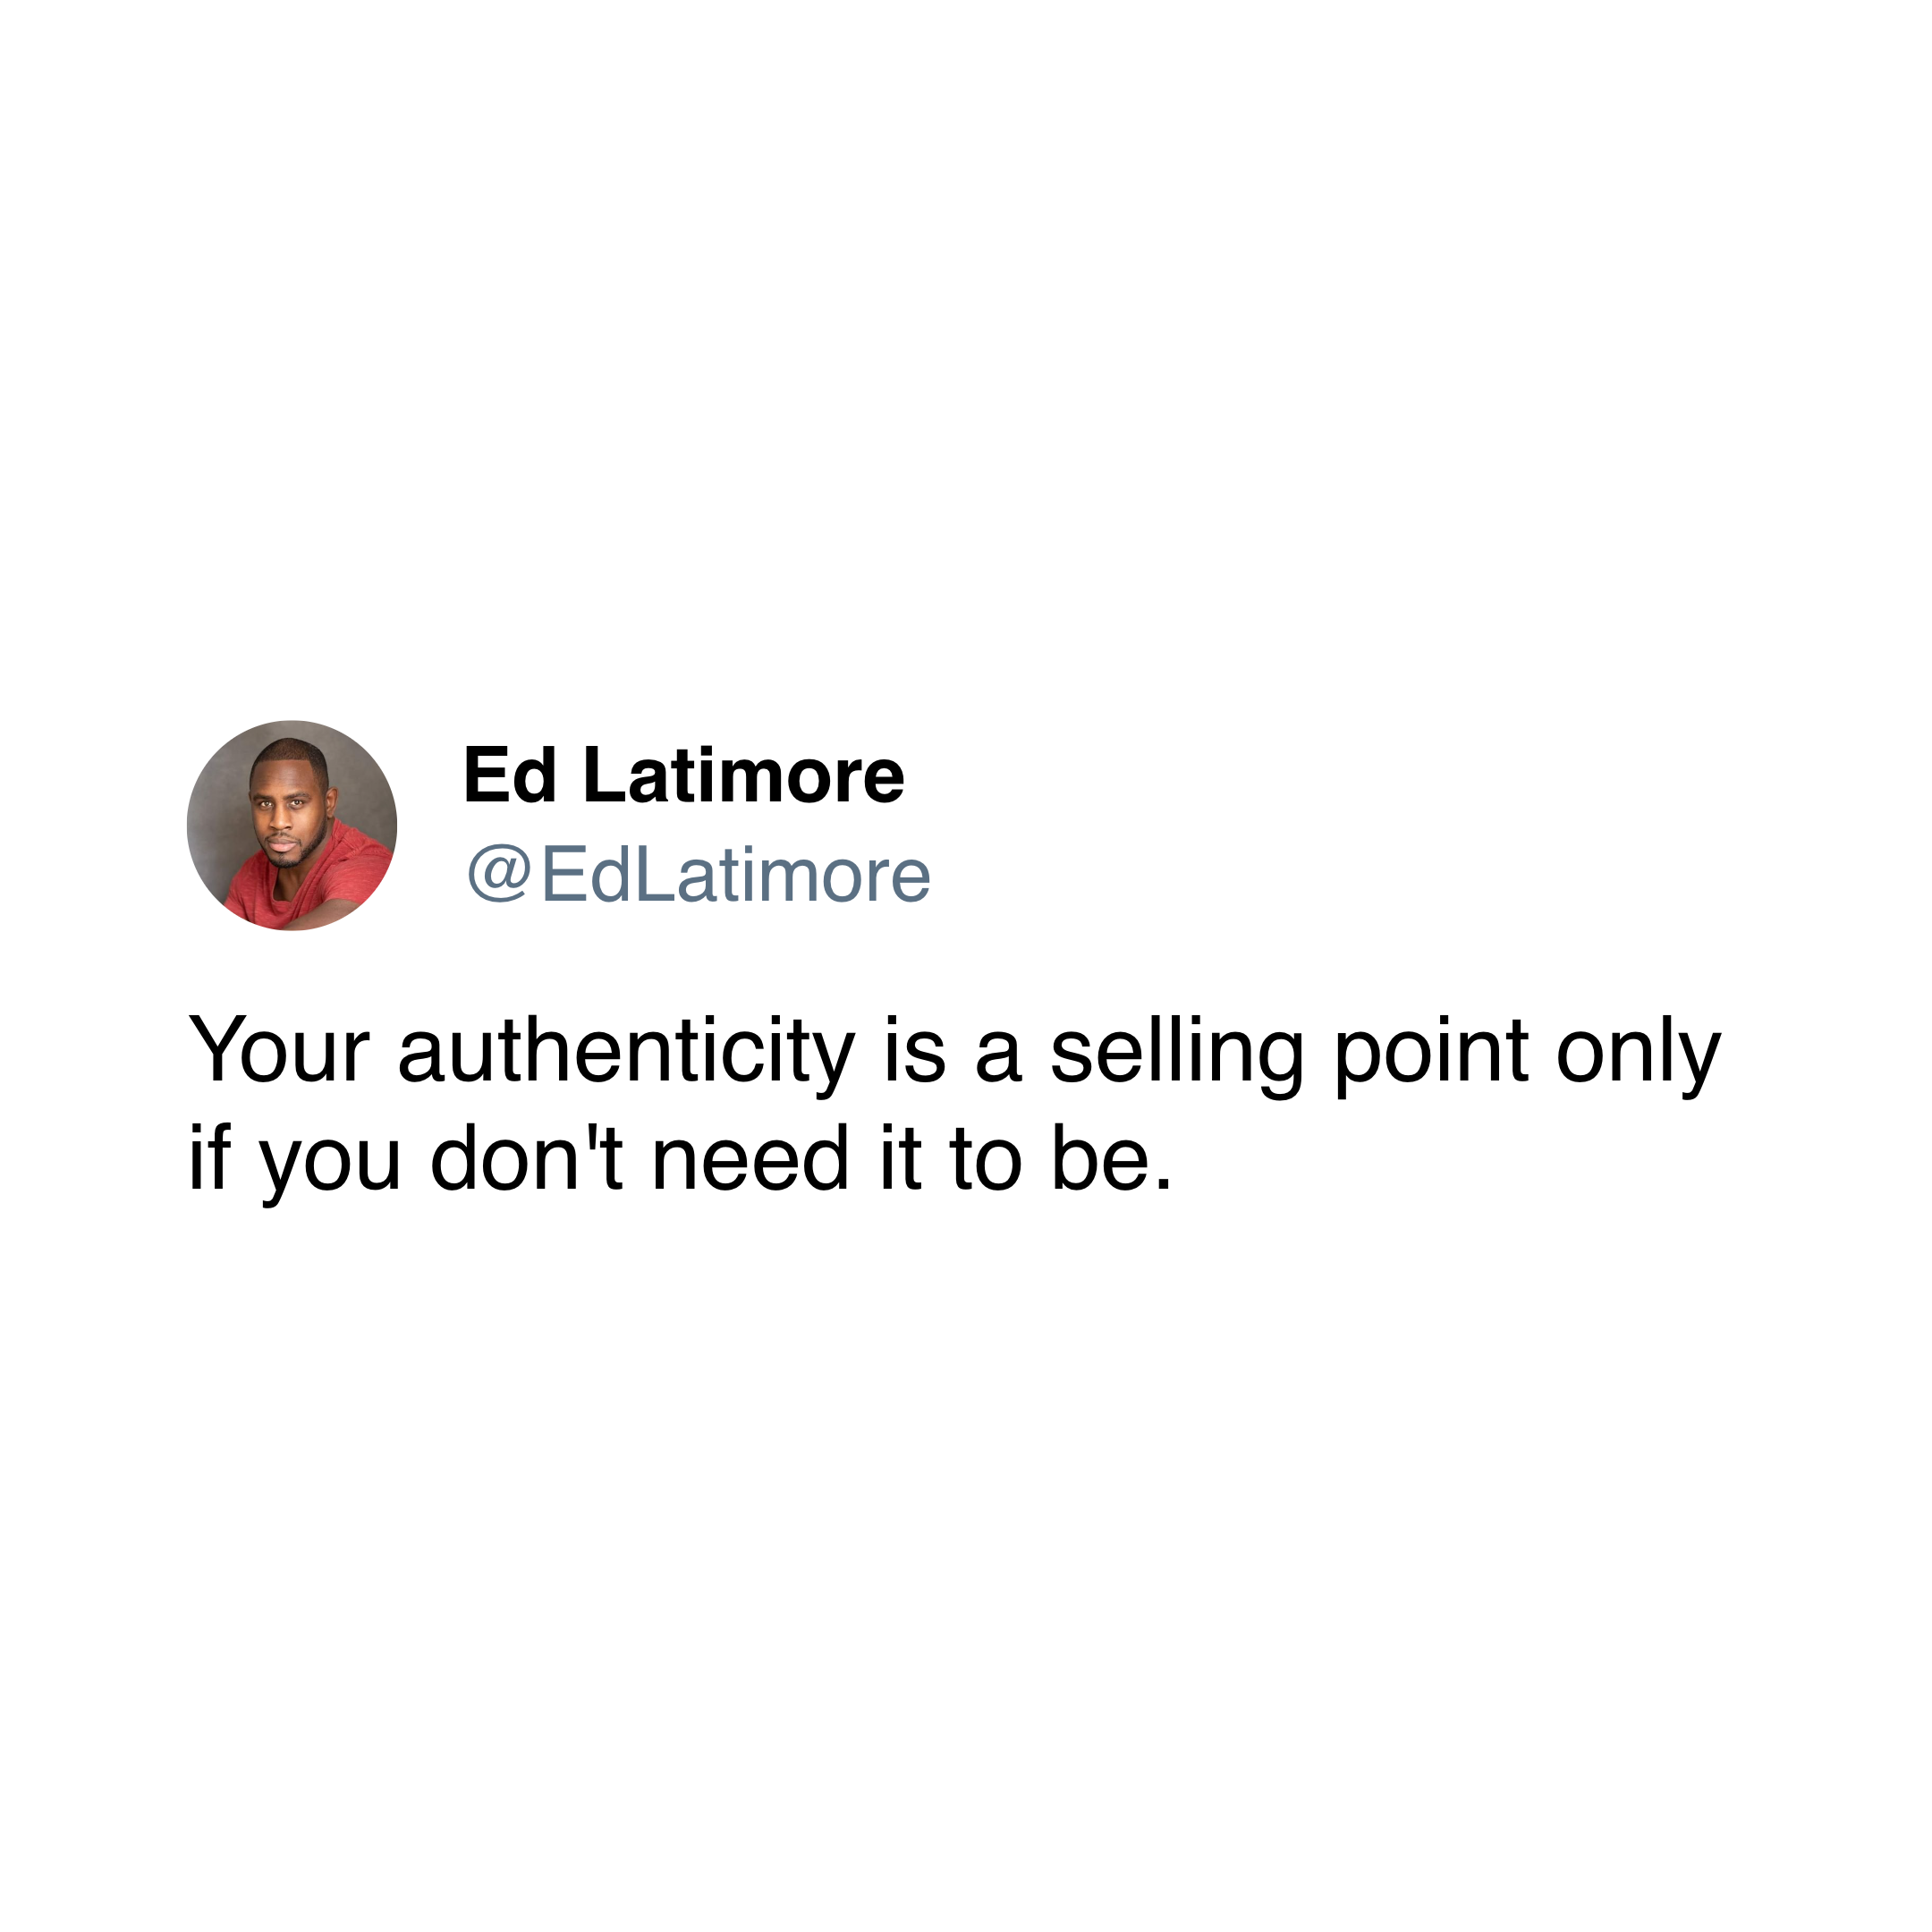 ed latimore authenticity quote "authenticity only a selling a point when it does not need to be"